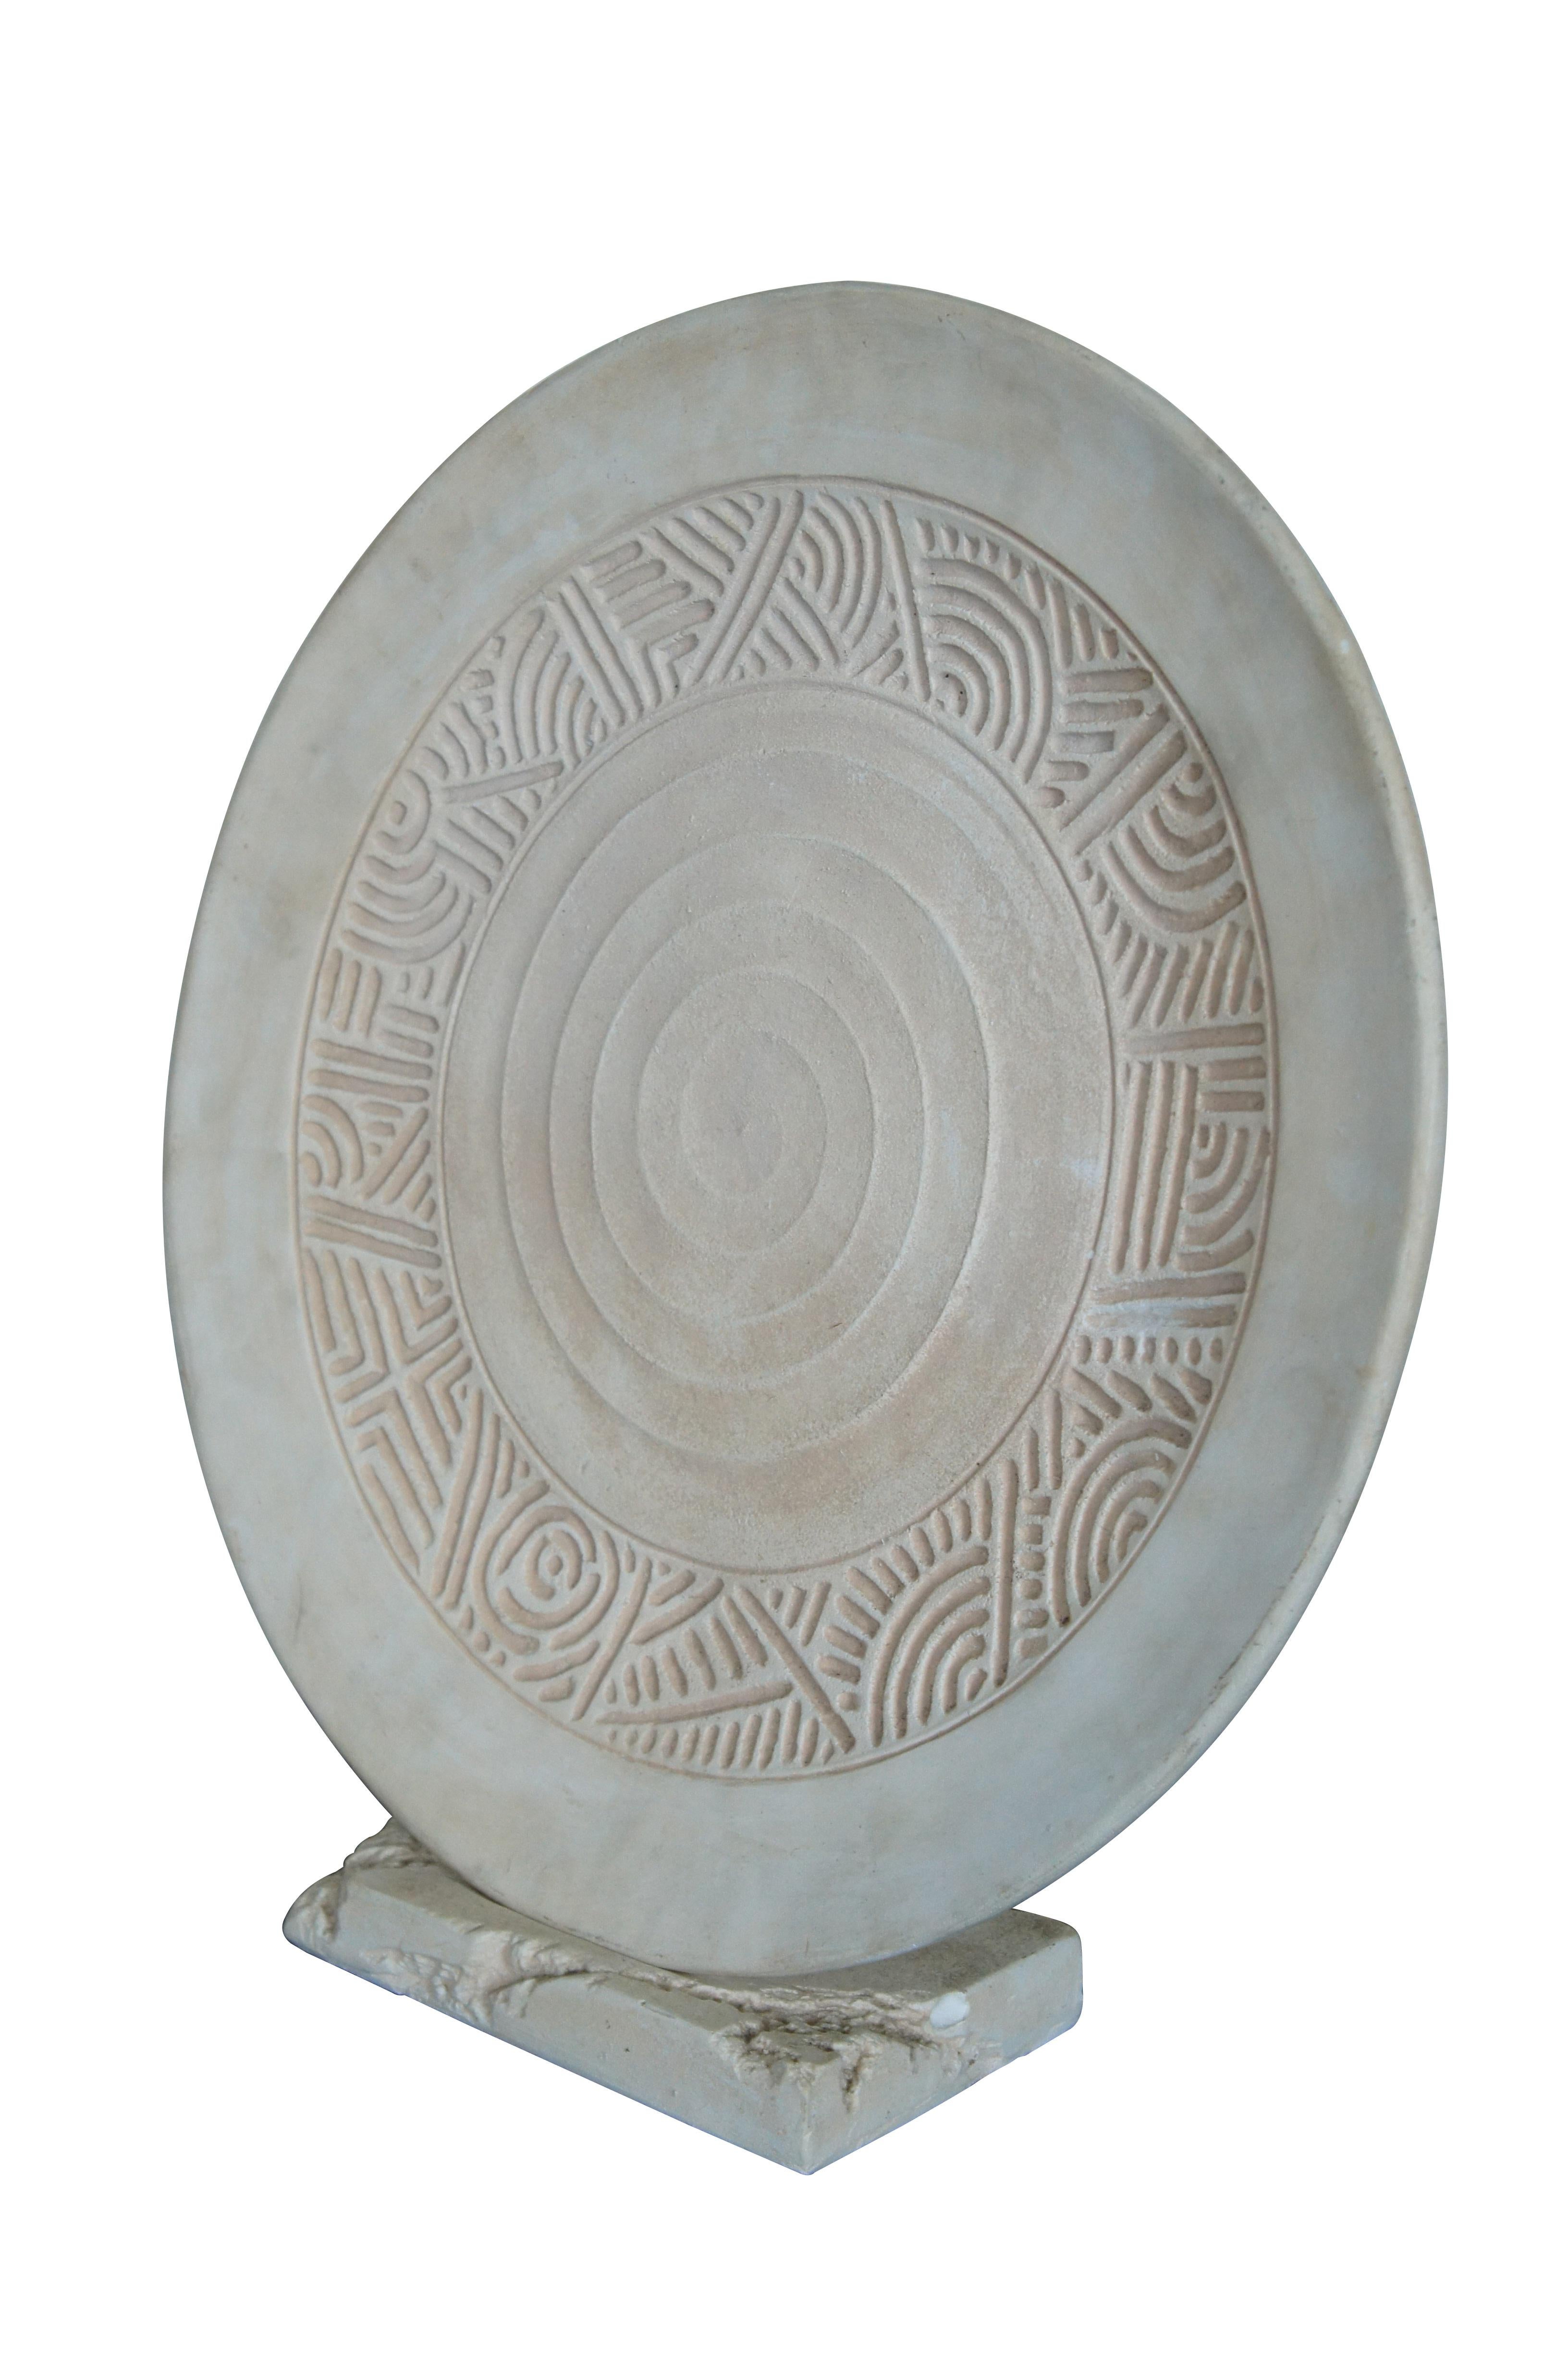 Vintage chalkware art sculpture display featuring a plate / charger / round disk with geometric patterns.  Comprend la base / le support.


Dimensions :
22,25